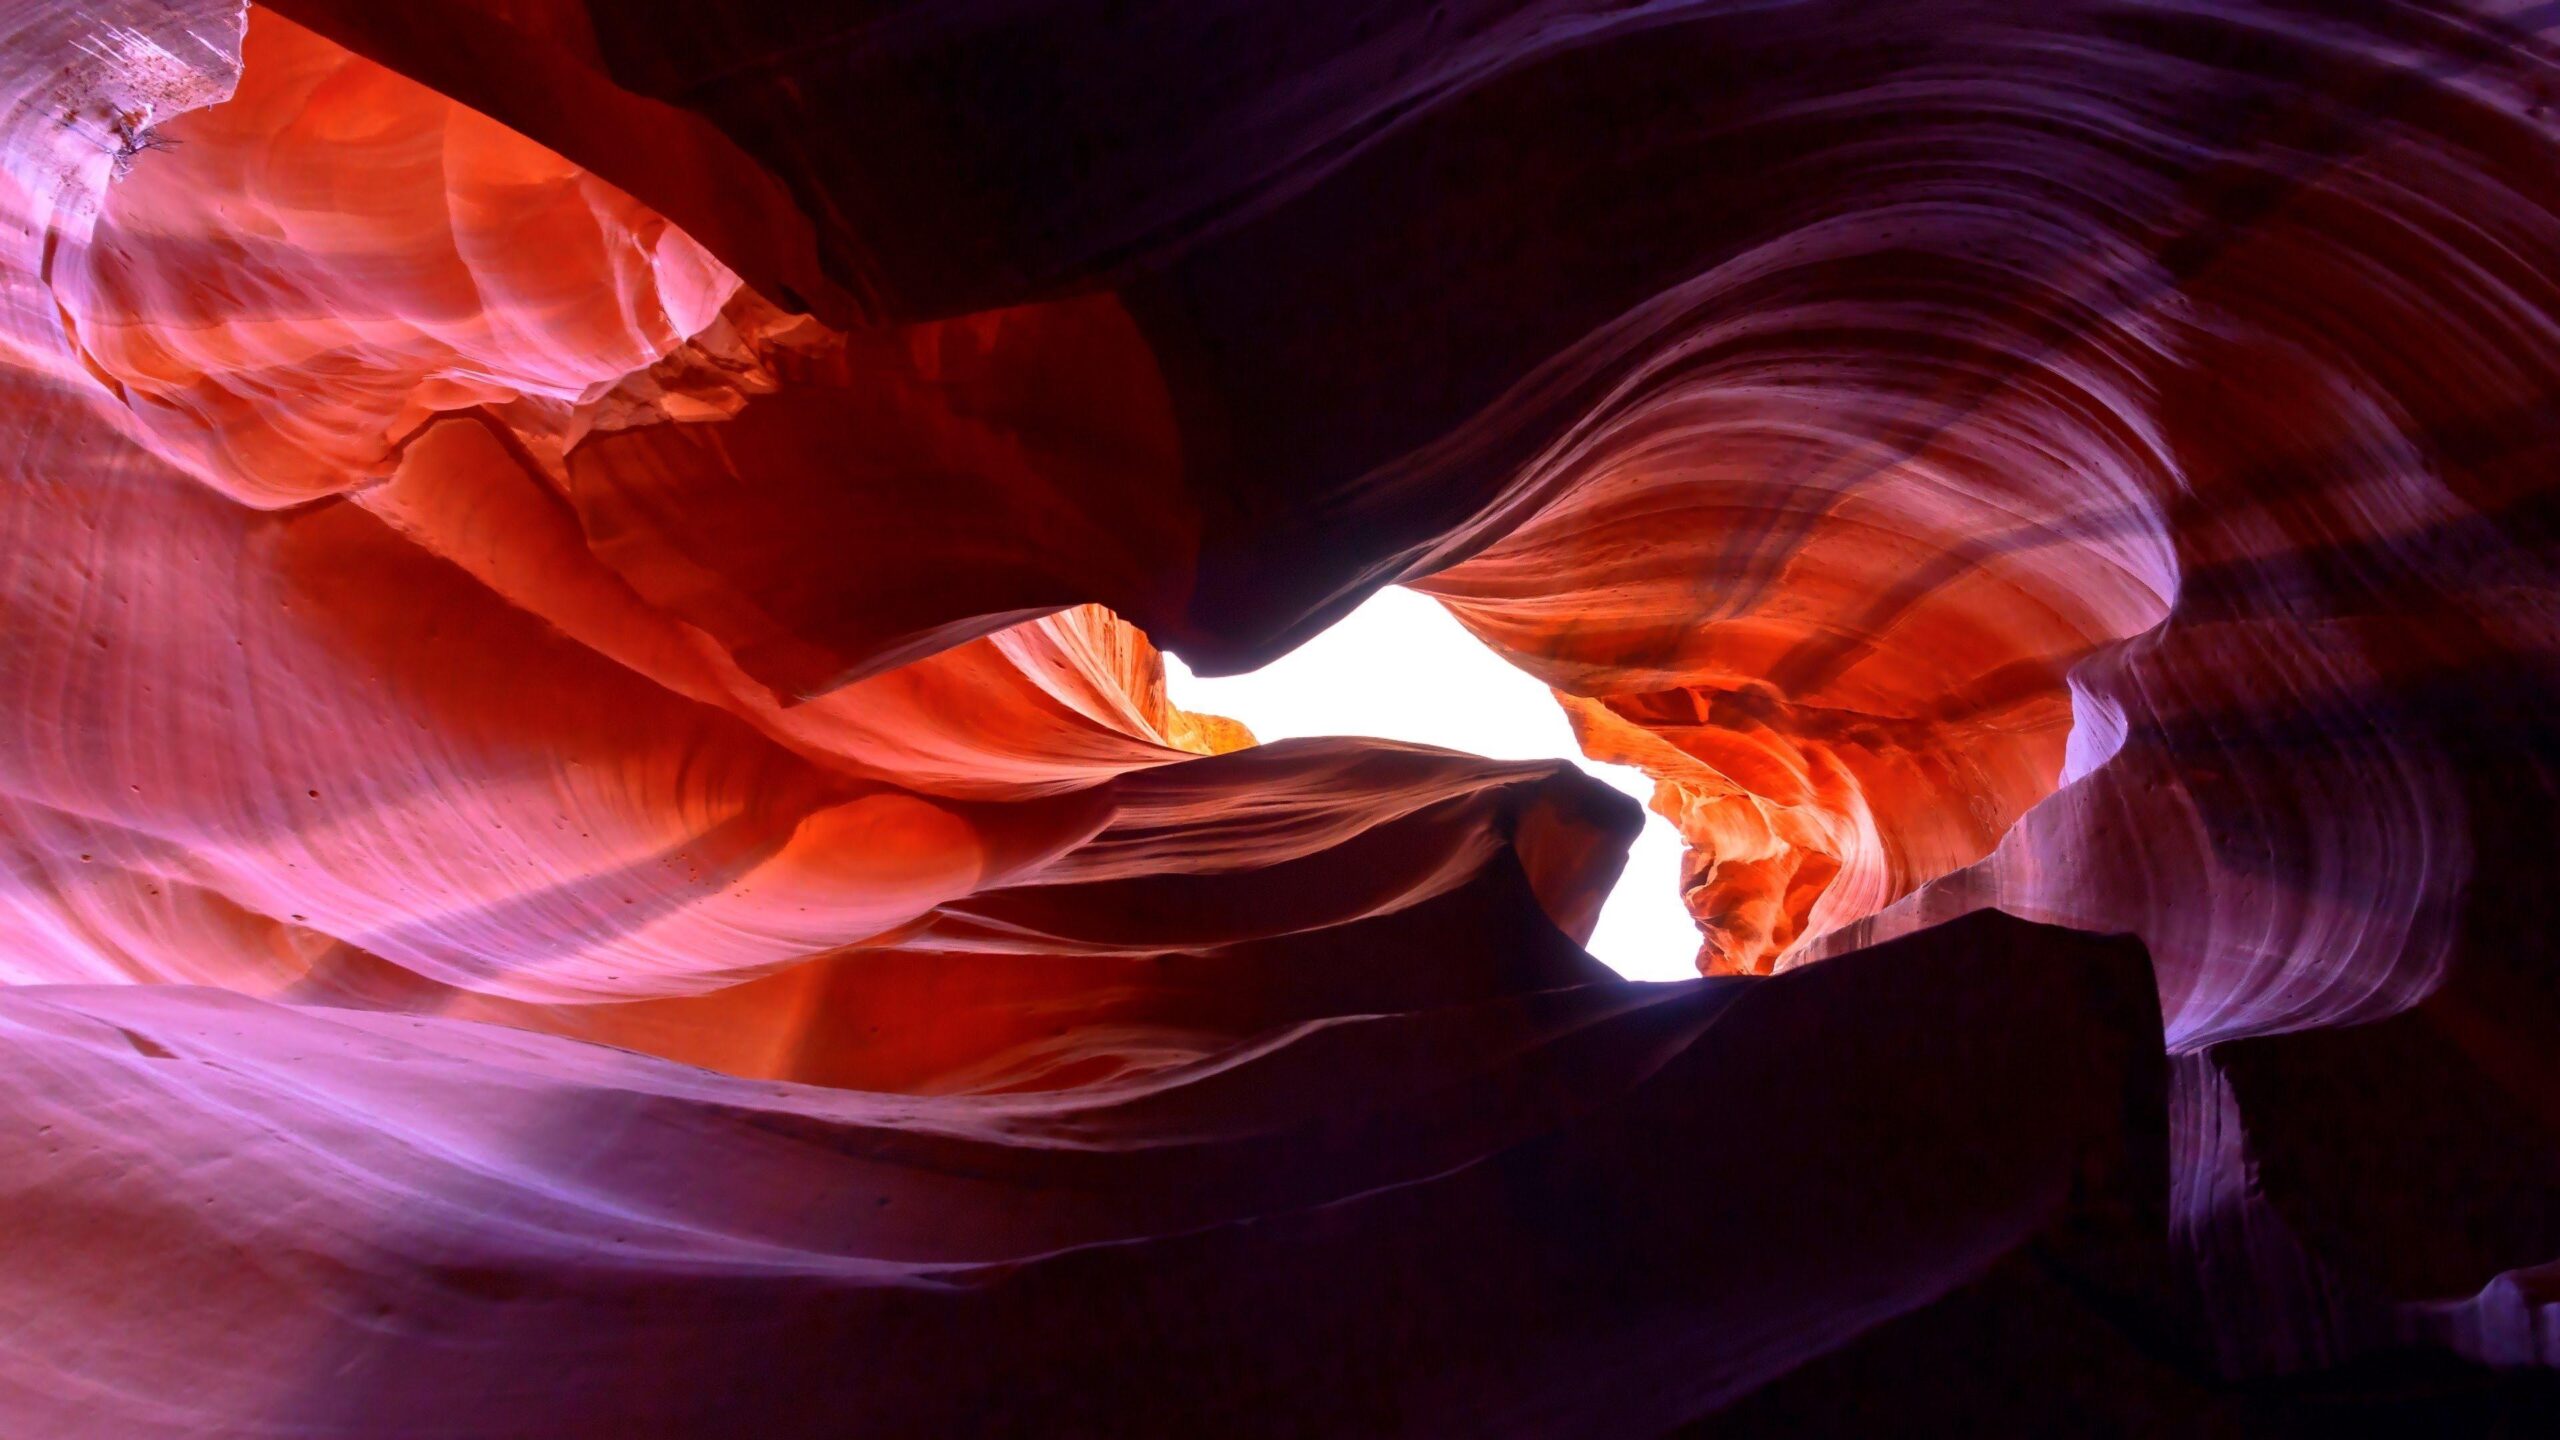 Download Antelope Canyon Wallpapers for UHD TV